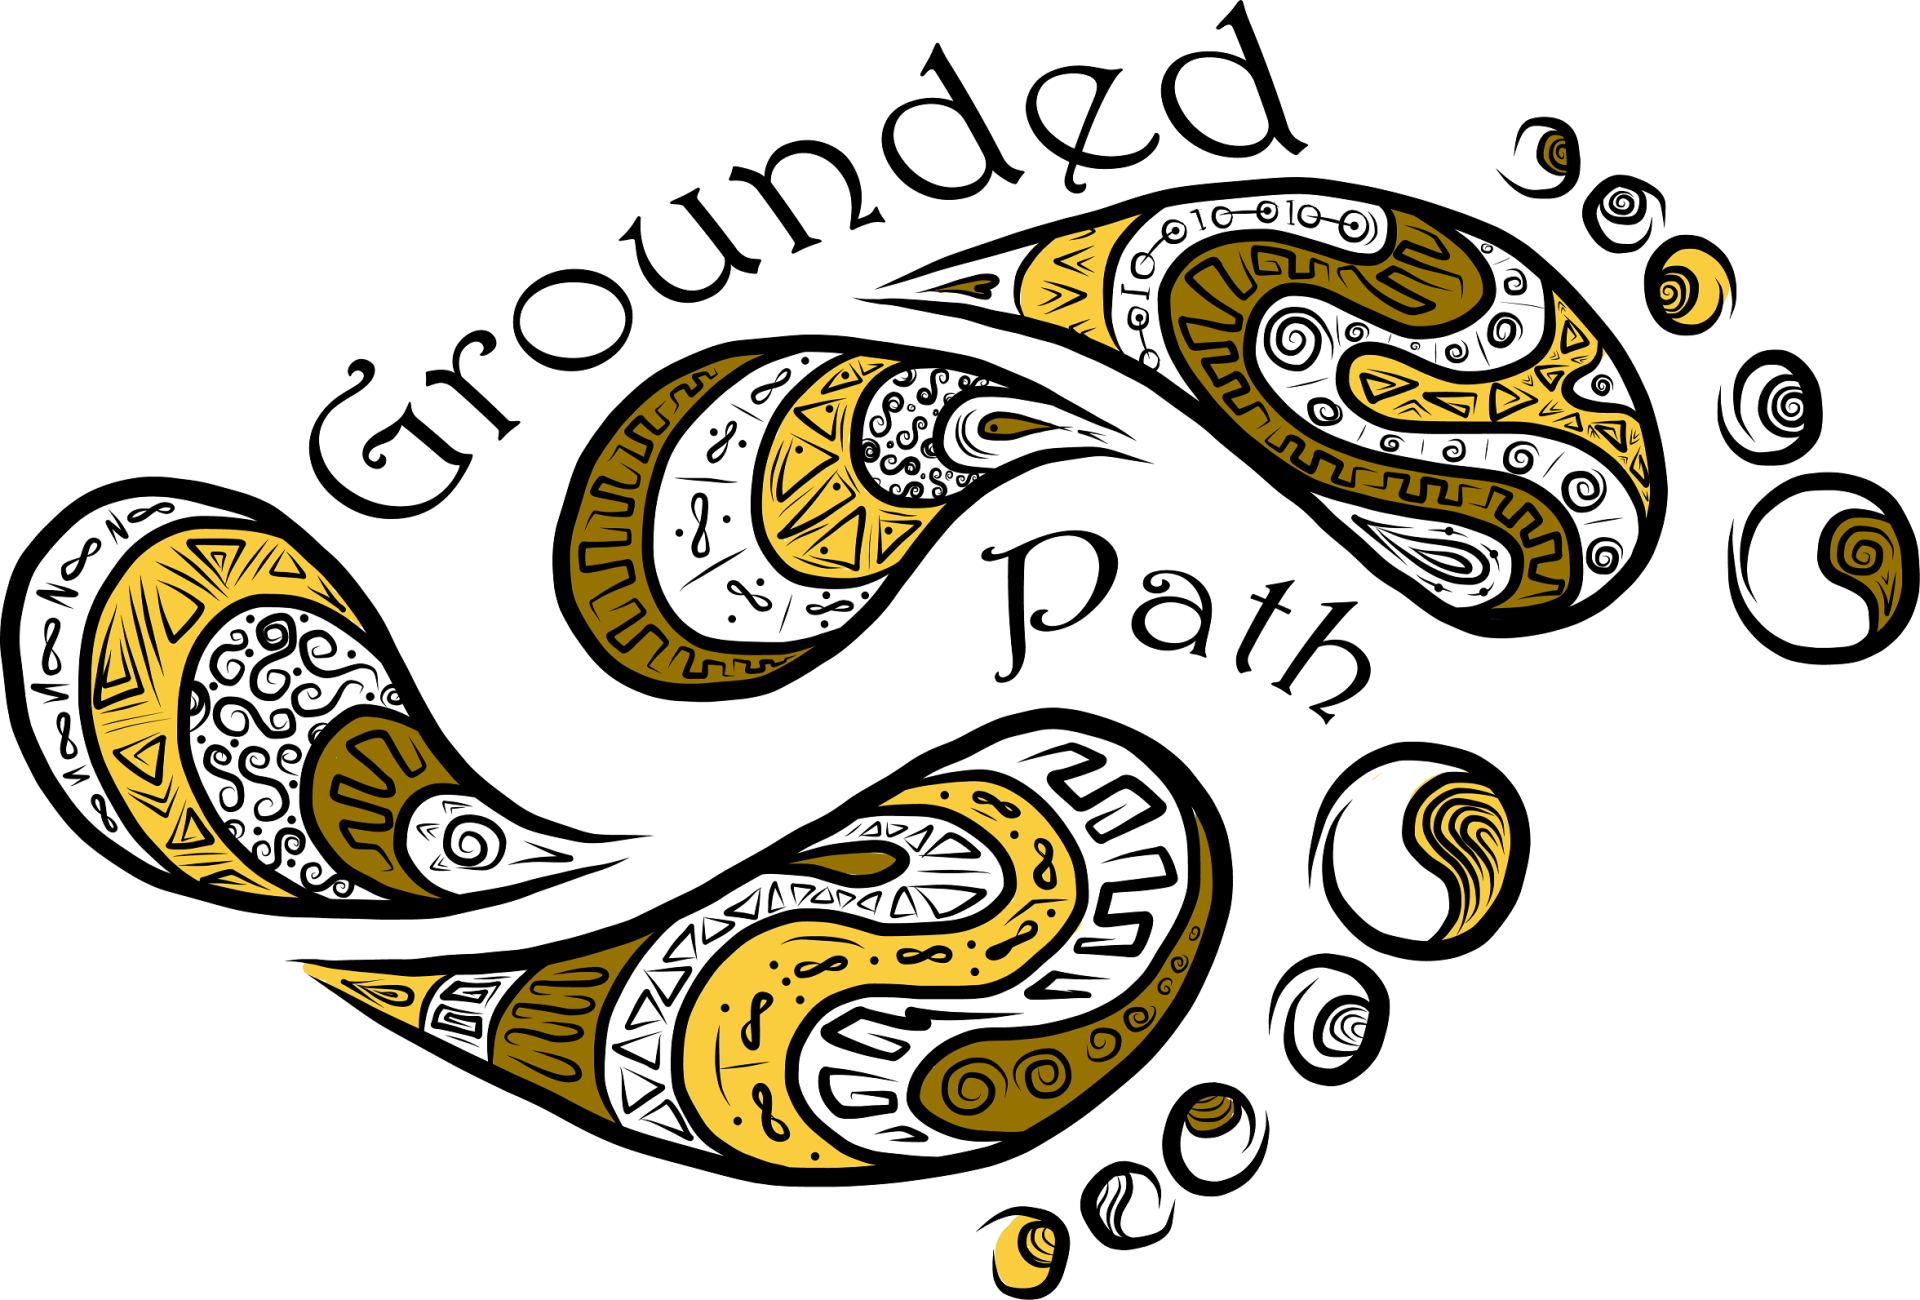 A drawing of a footprint with the words `` grounded path '' written around it.